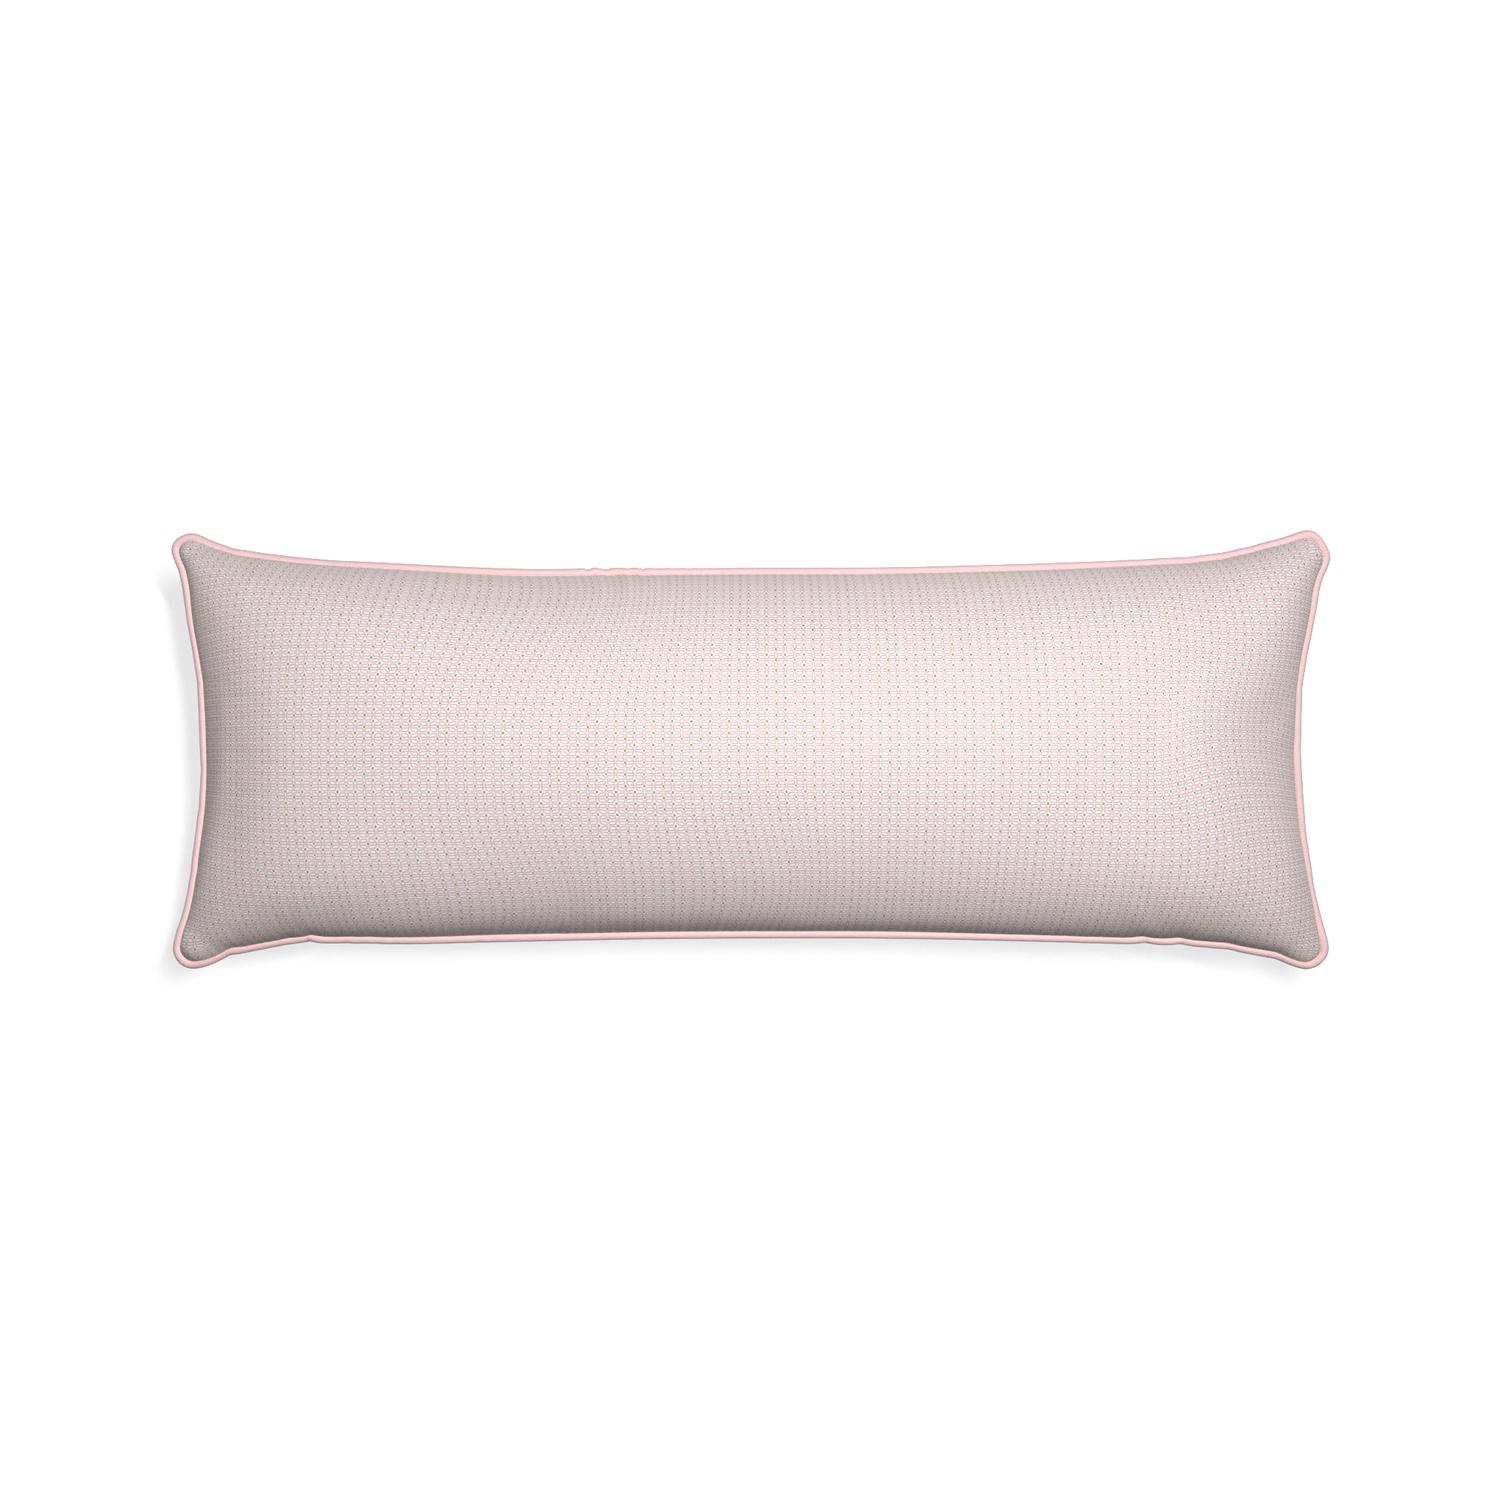 Xl-lumbar loomi pink custom pillow with petal piping on white background